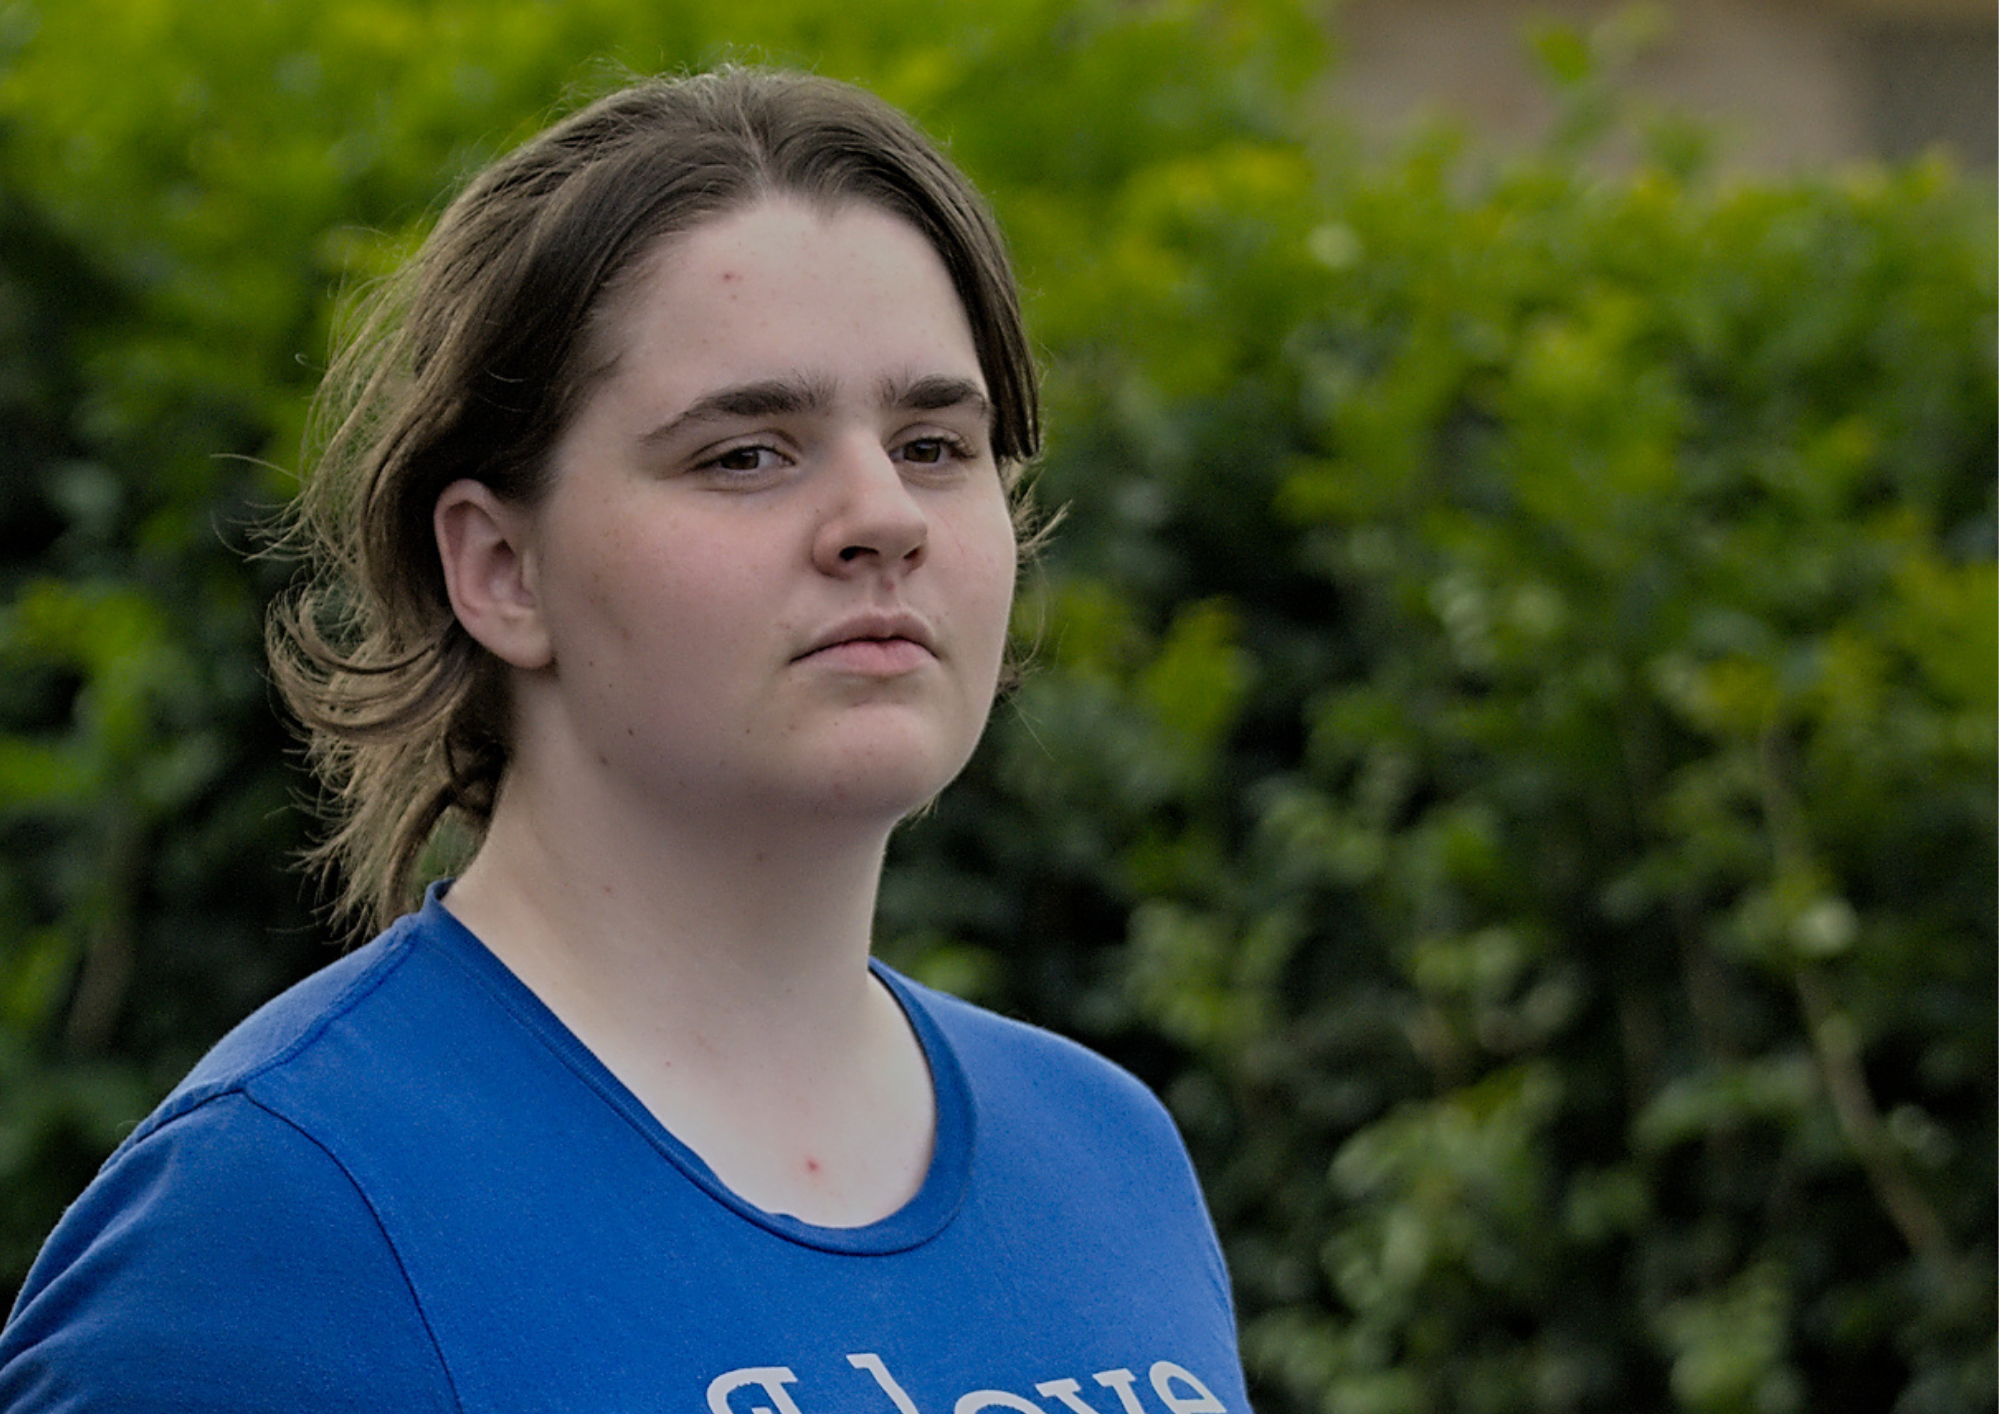 Photo of Maria who has dark brown hair tied back in a ponytail and is wearing a blue shirt that reads I love someone who is autistic (it's me).